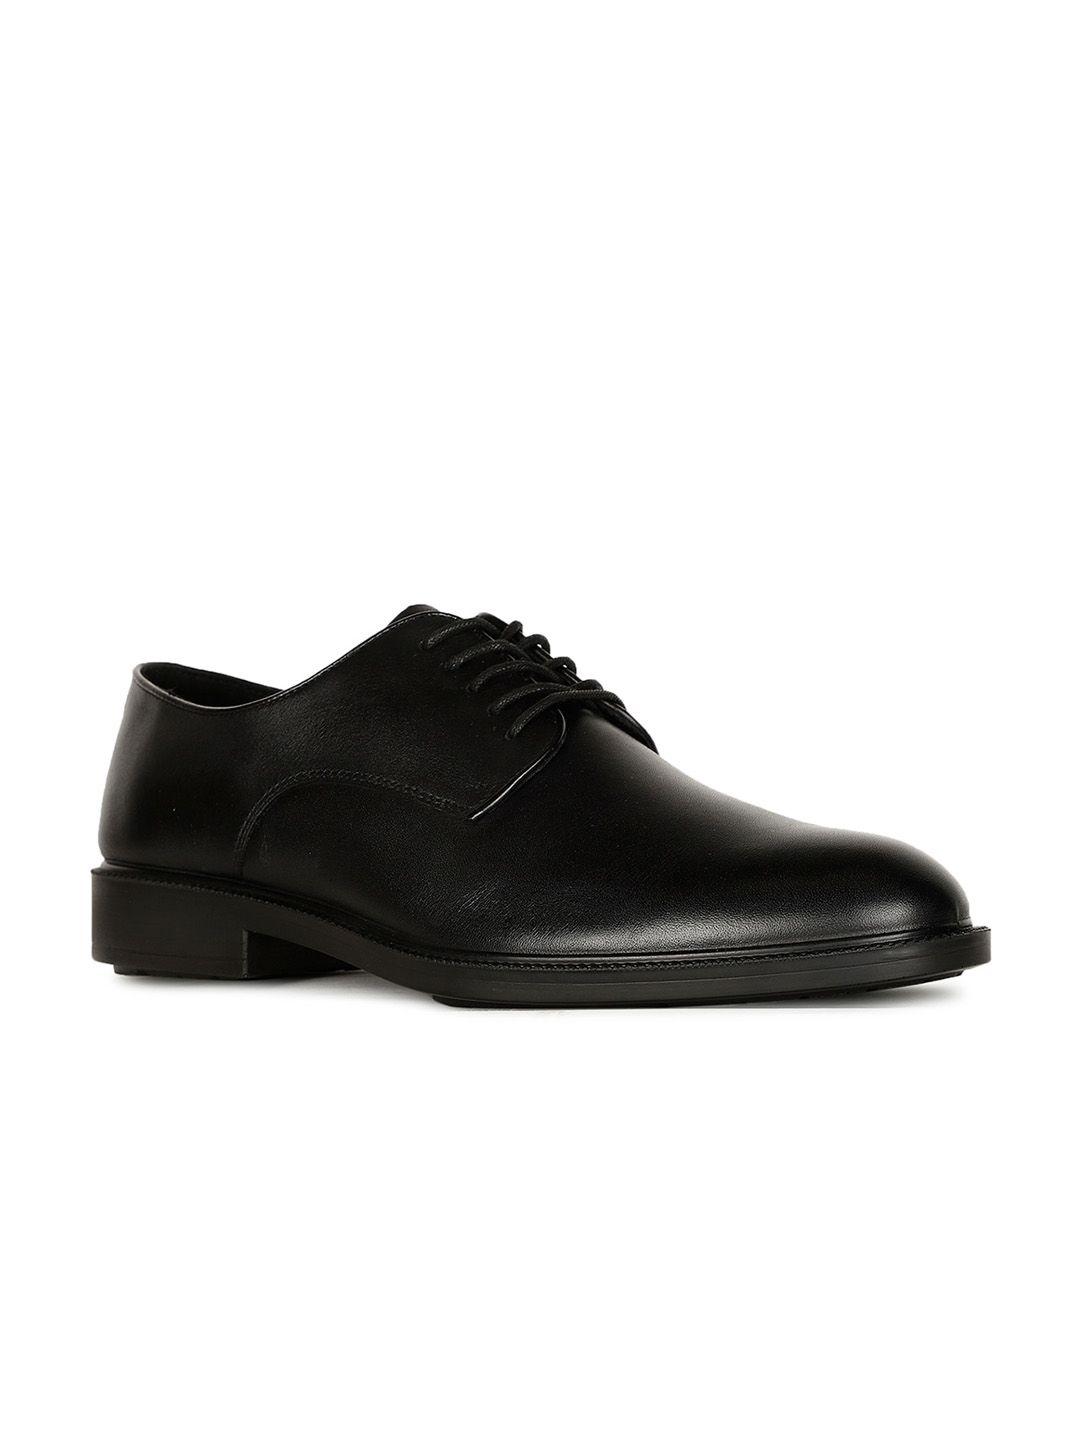 hush-puppies-men-black-leather-formal-derby's-shoes